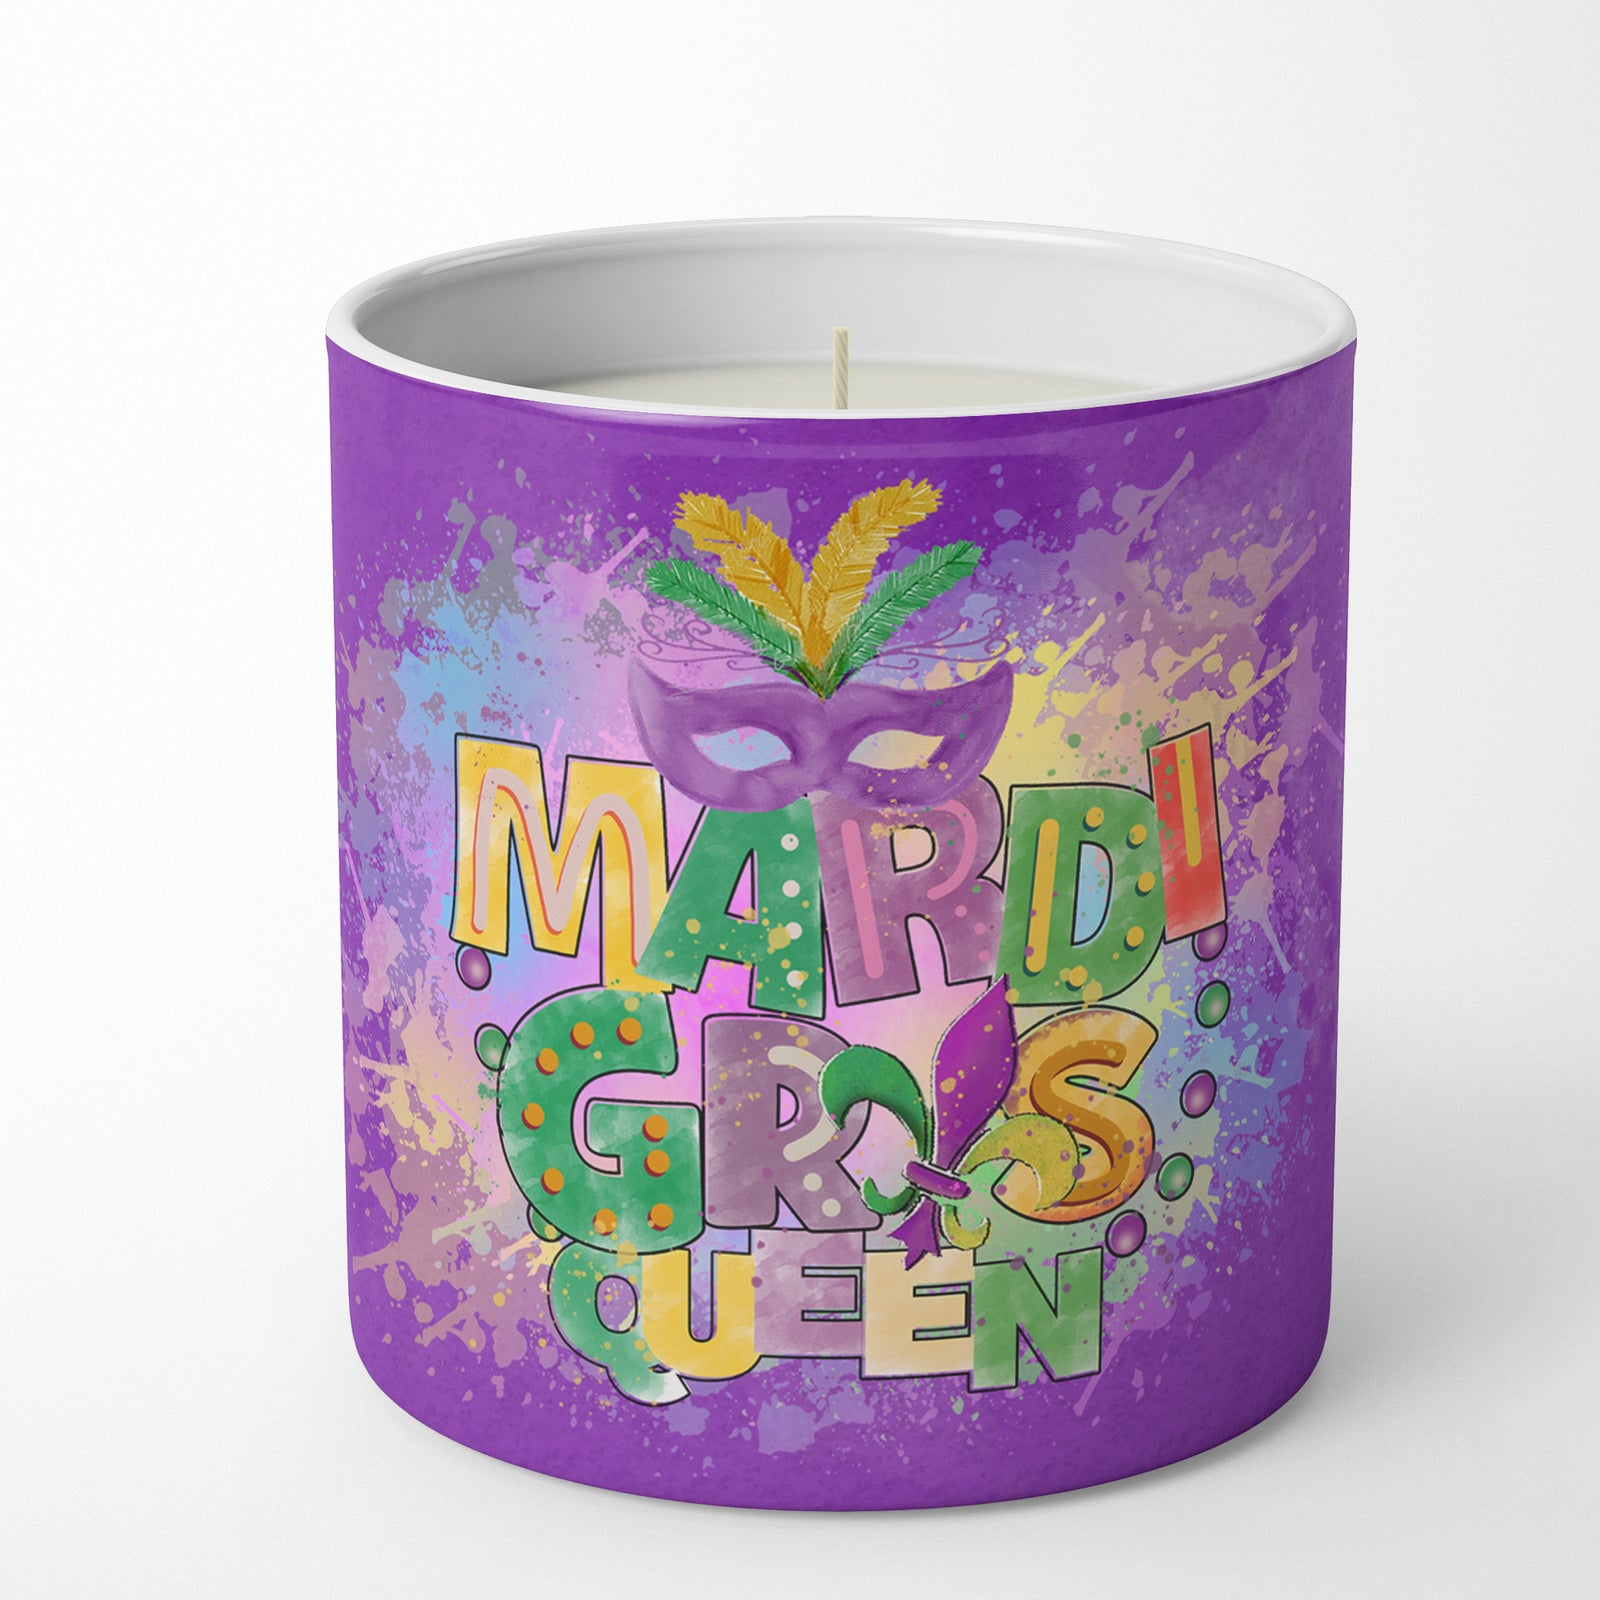 Buy this Mardi Gras Queen 10 oz Decorative Soy Candle